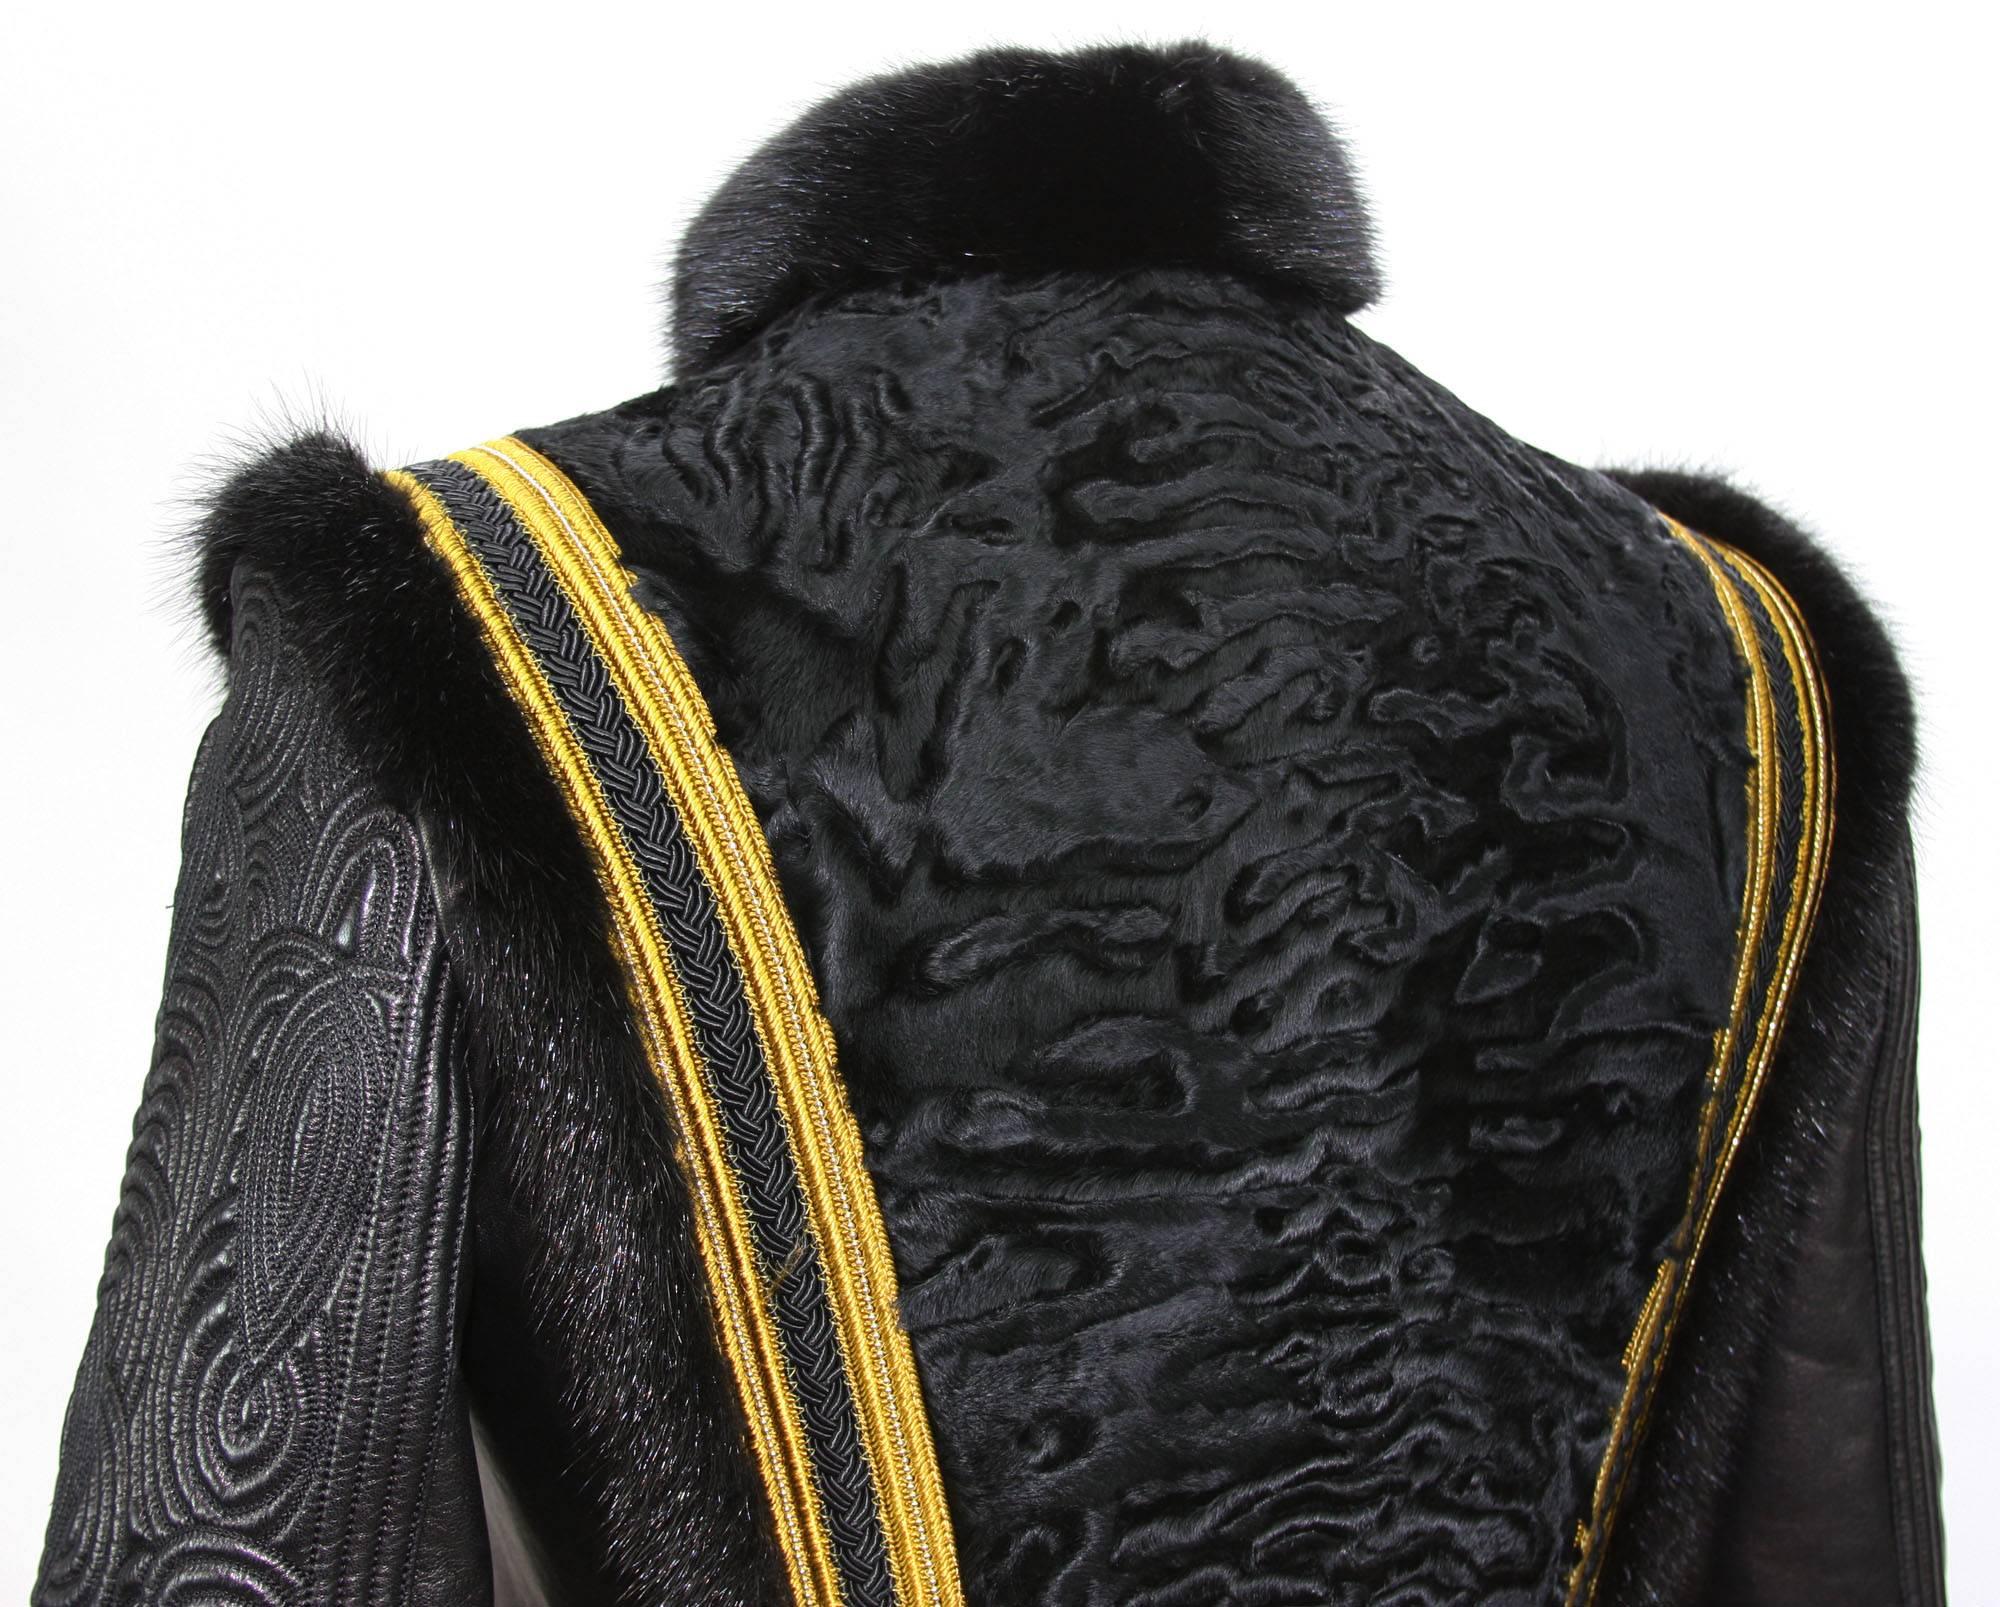 NEW Exquisite $7650 ETRO Embossed Leather Mink Fur Lamb Jacket It.42 - US 6 For Sale 4